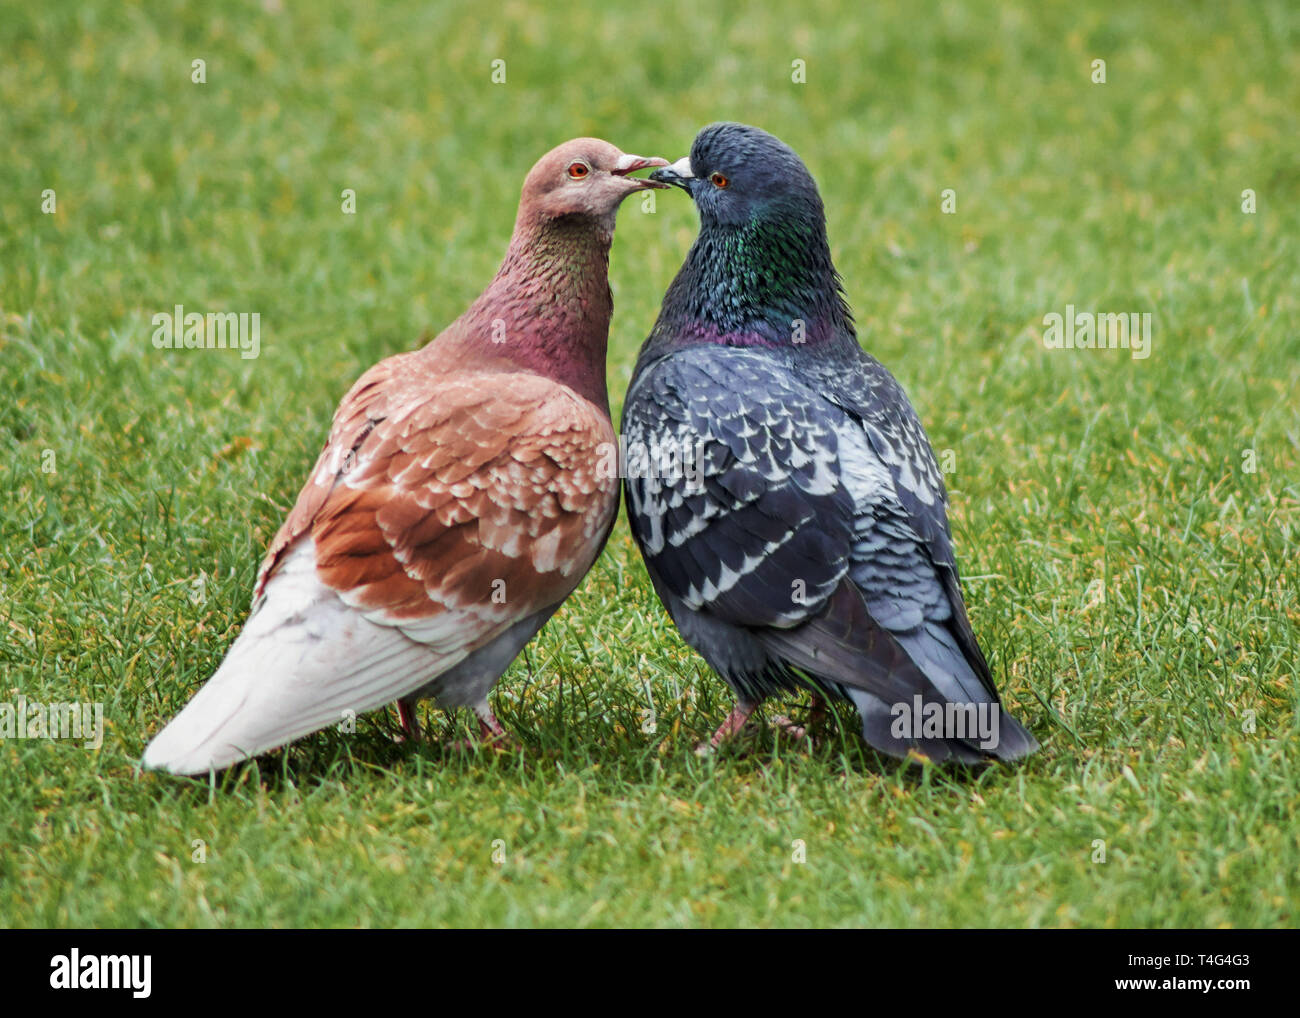 Two pigeons during a courtship ritual with their beaks touching Stock Photo